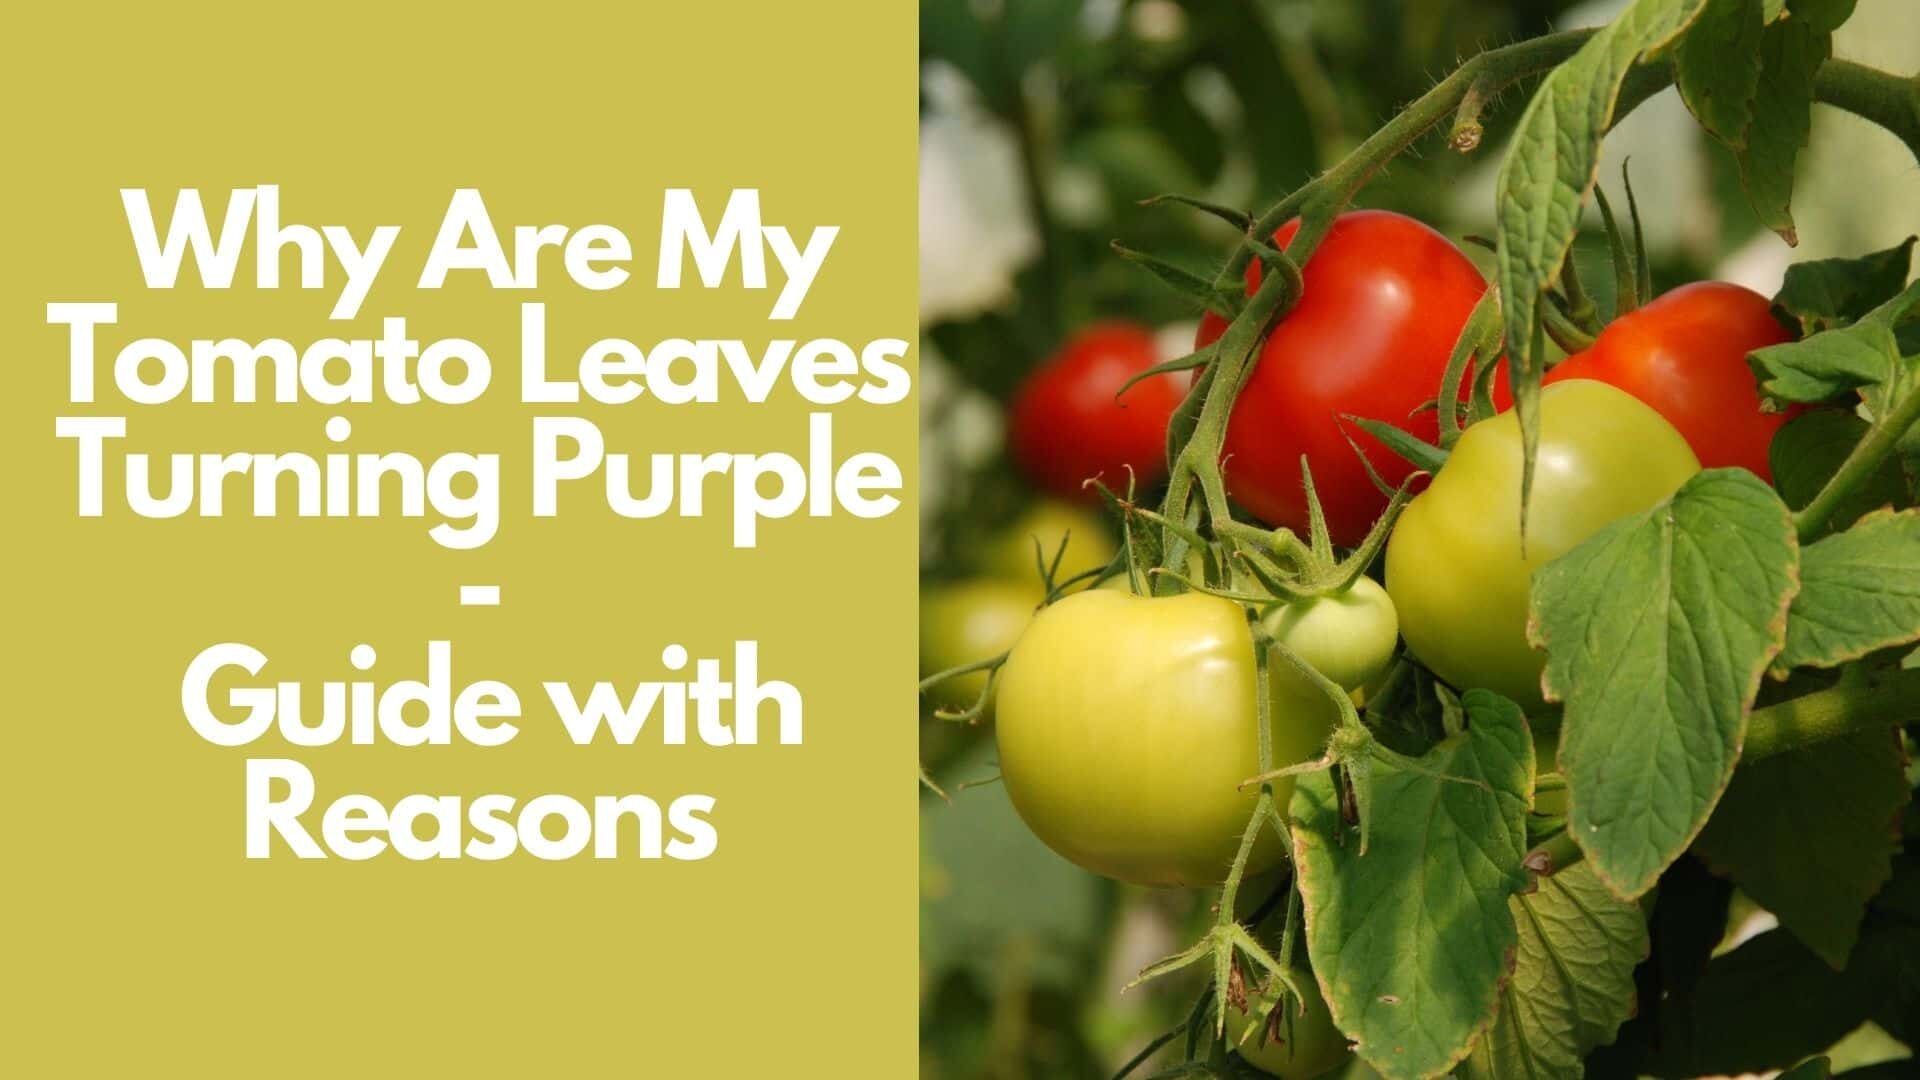 Why Are My Tomato Leaves Turning Purple: Guide with Reasons